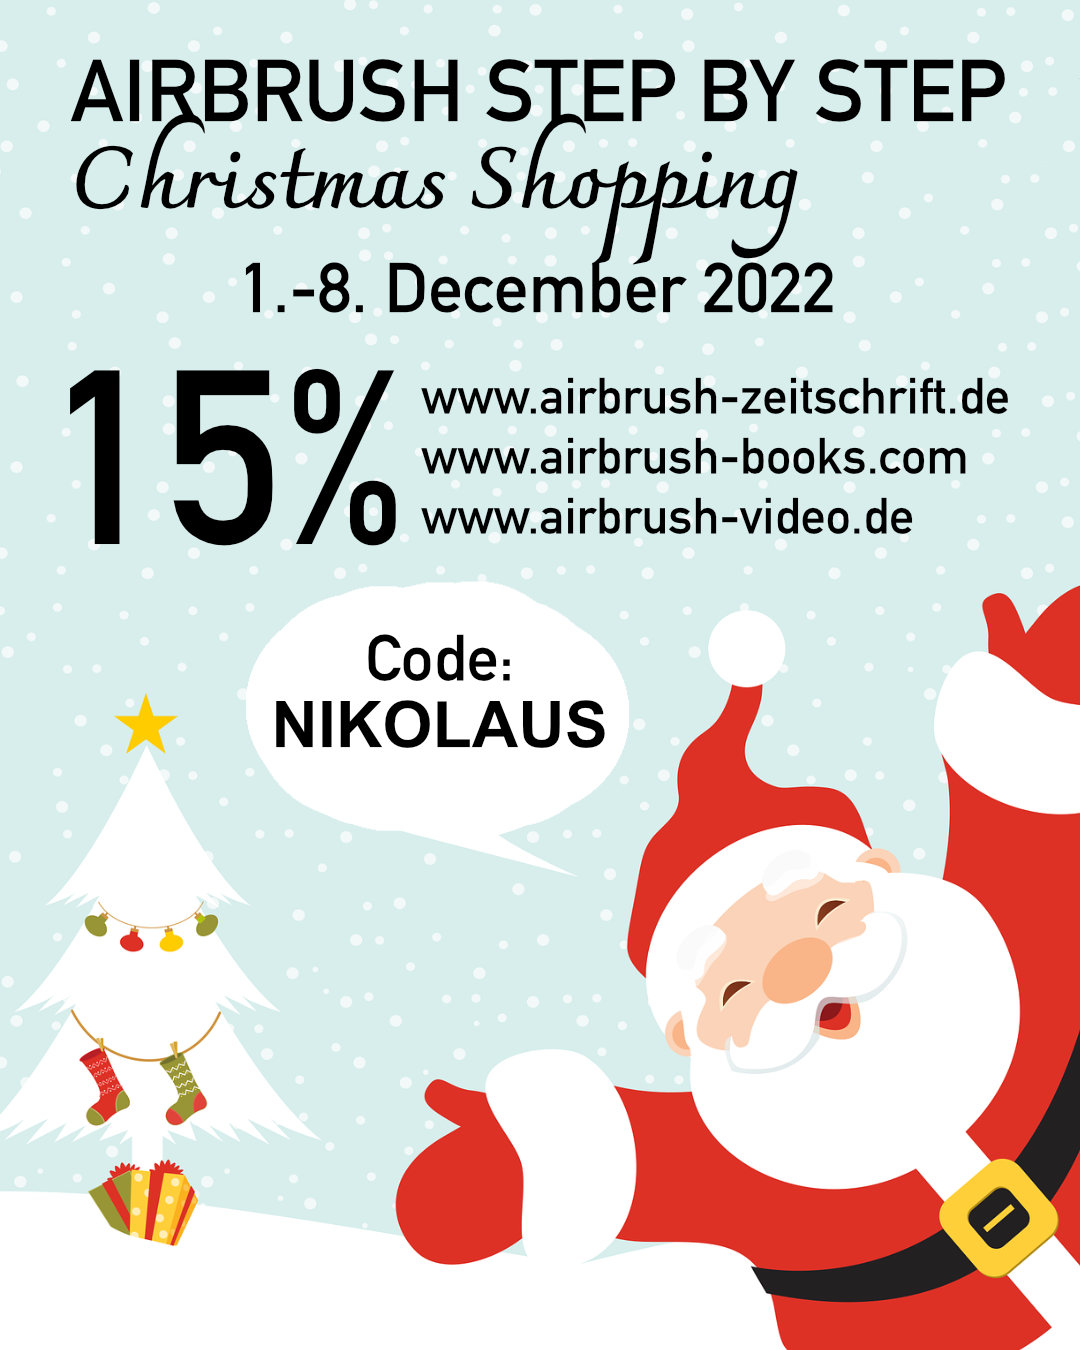 Christmas Shopping with Airbrush Step by Step magazine